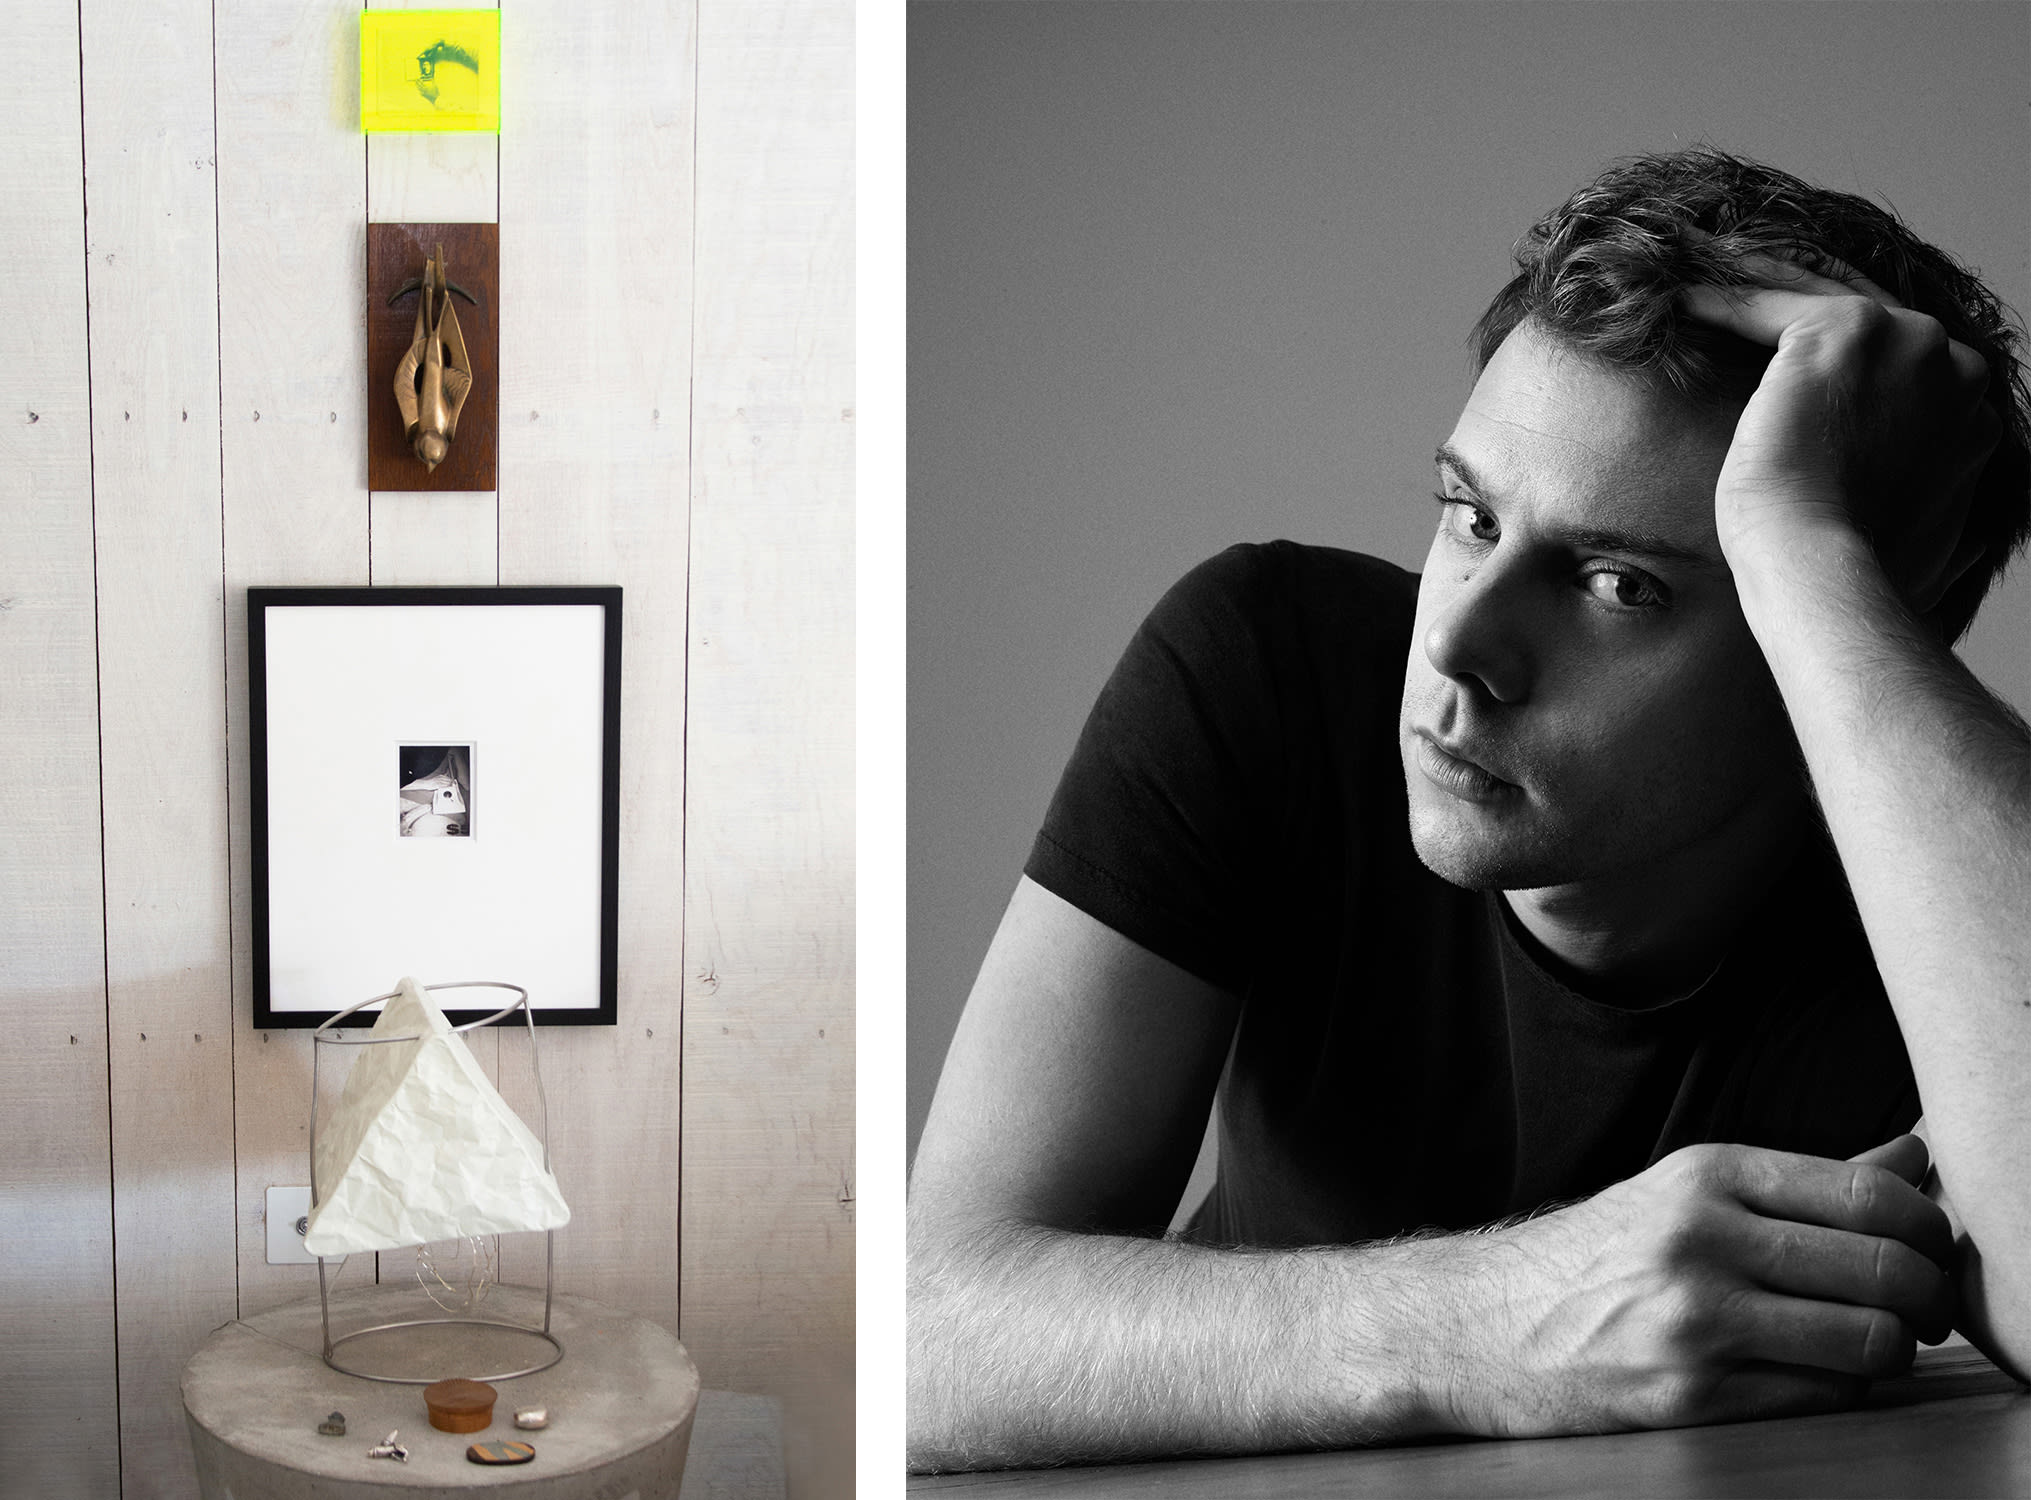 Left: Works from top to bottom: a polaroid photograph by Paul Thek; a swallow door knocker by Gertrude Hermes; Untitled, 1973 by Robert Mapplethorpe; a Jo Jonas lamp; a wooden box by David Pye.Right: Jonathan Anderson. Courtesy of Loewe.